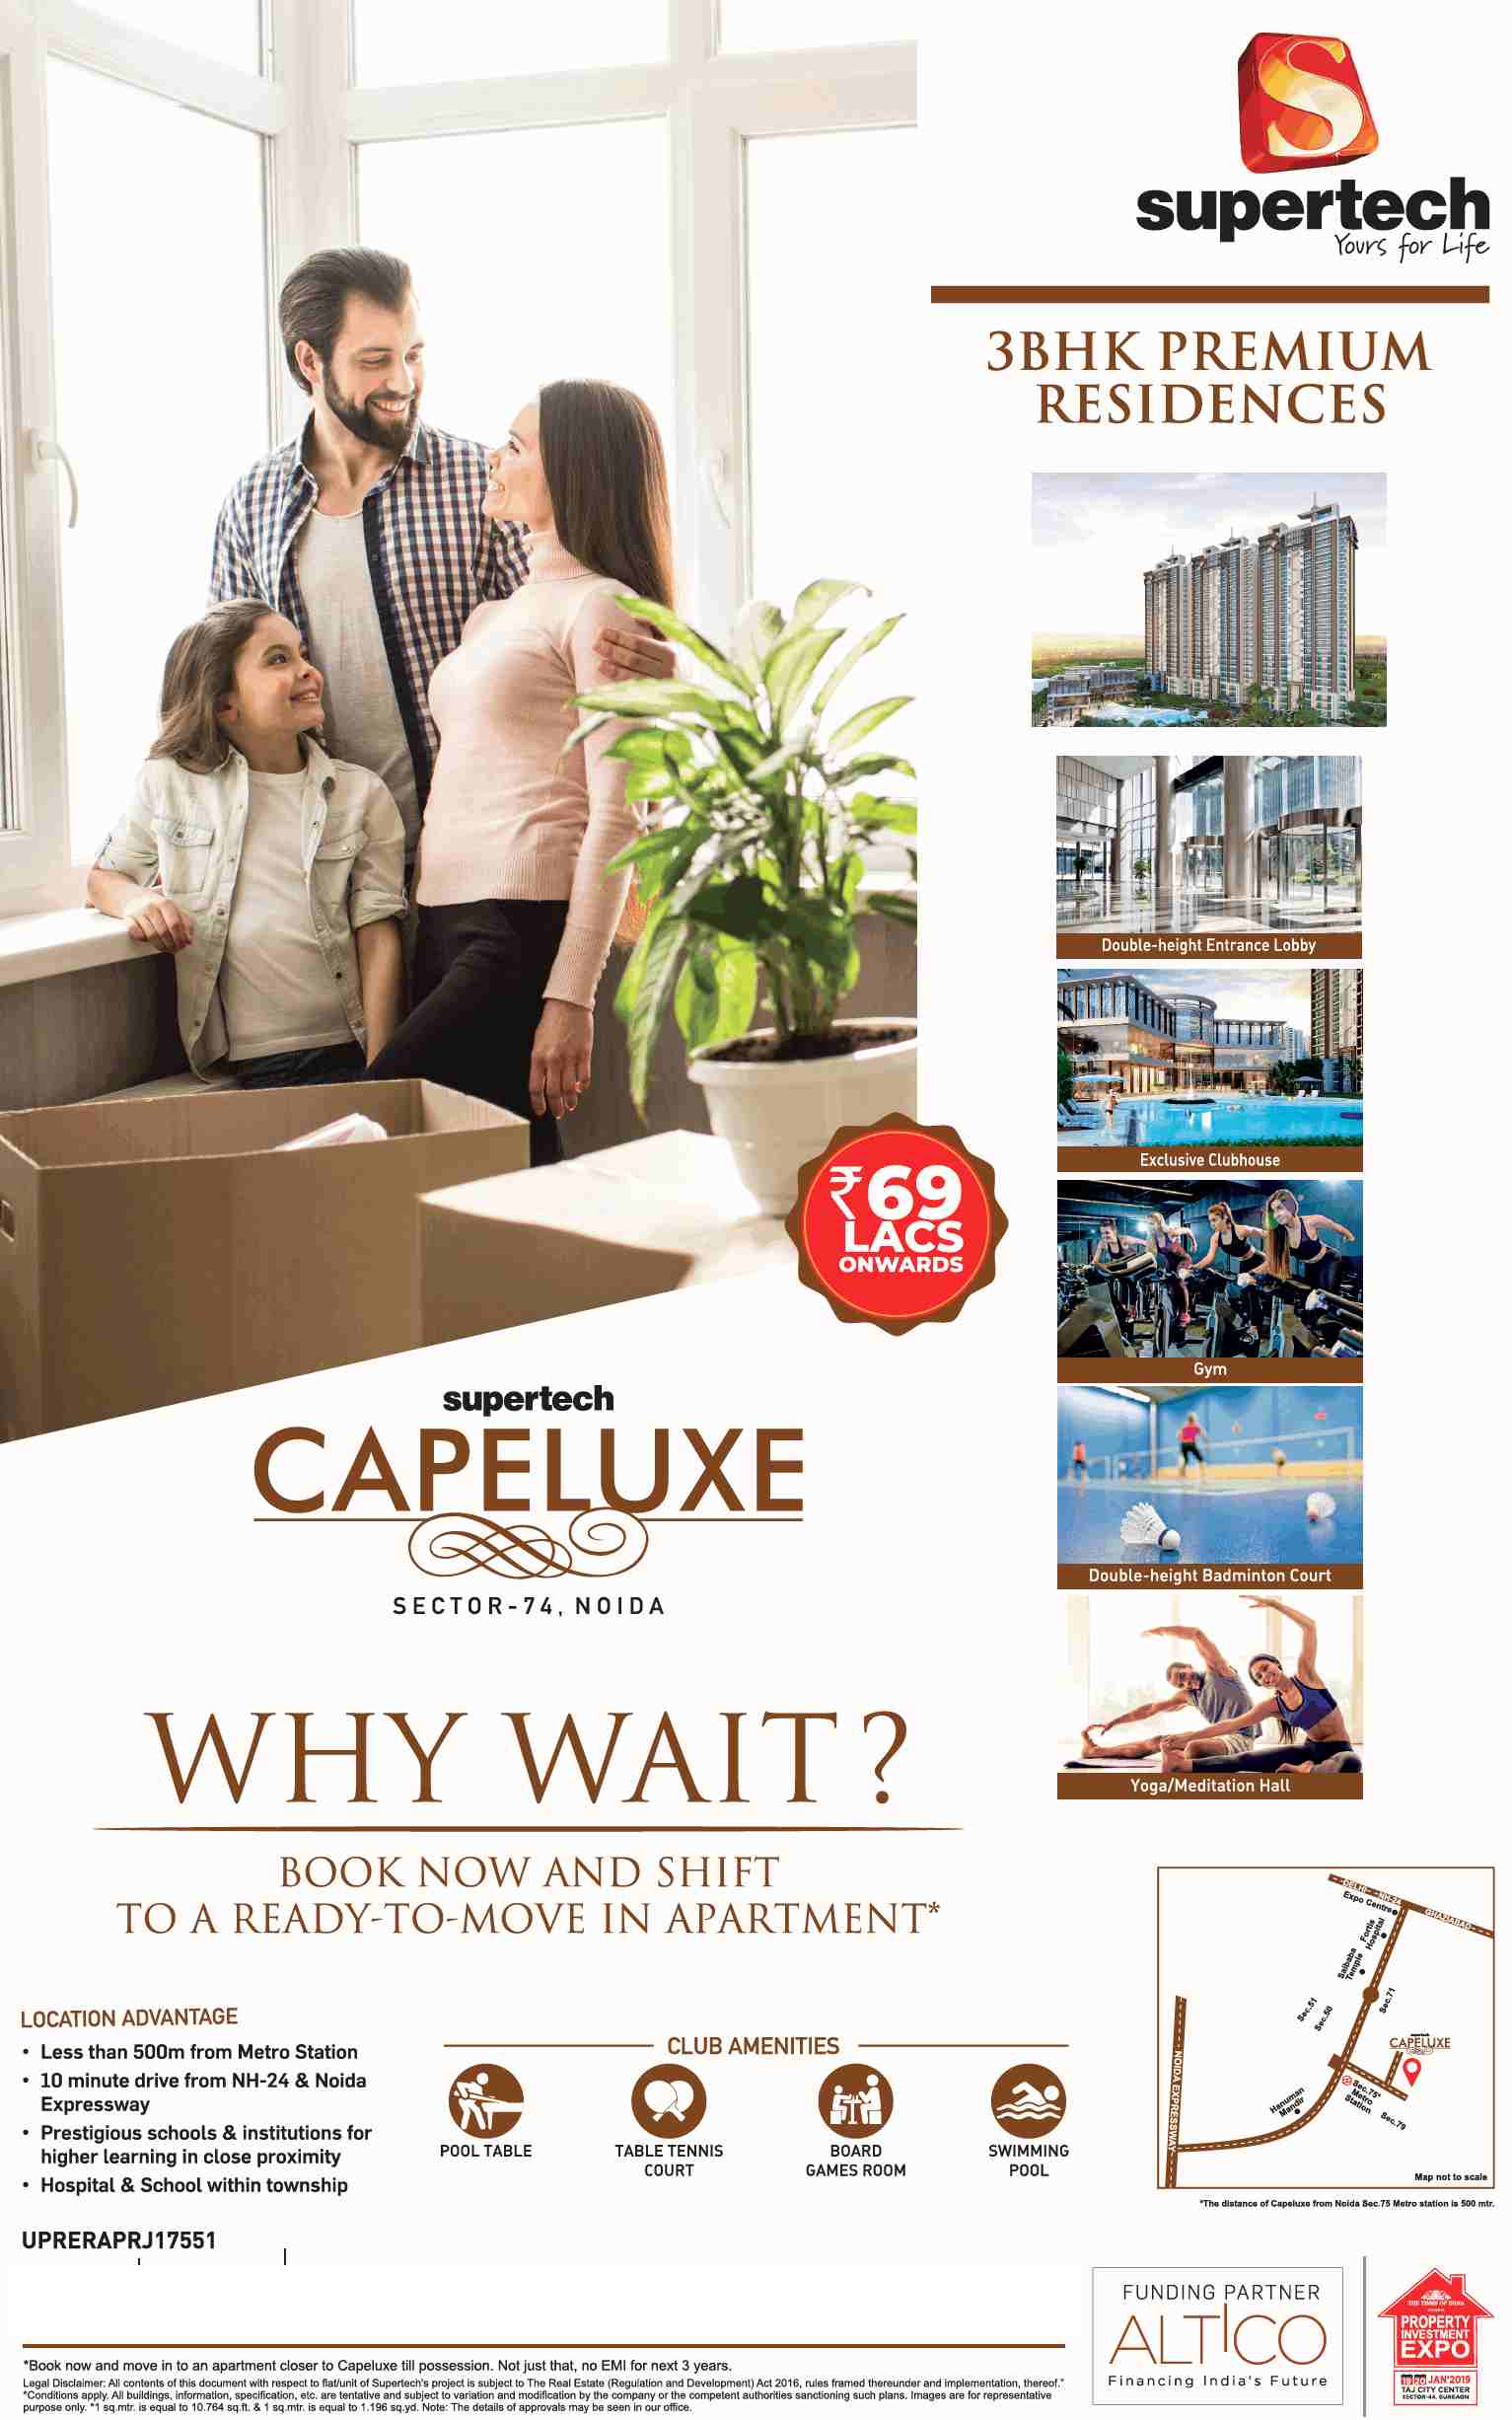 Book now and shift to ready to move in apartment at Supertech Capeluxe in Sector 74, Noida Update